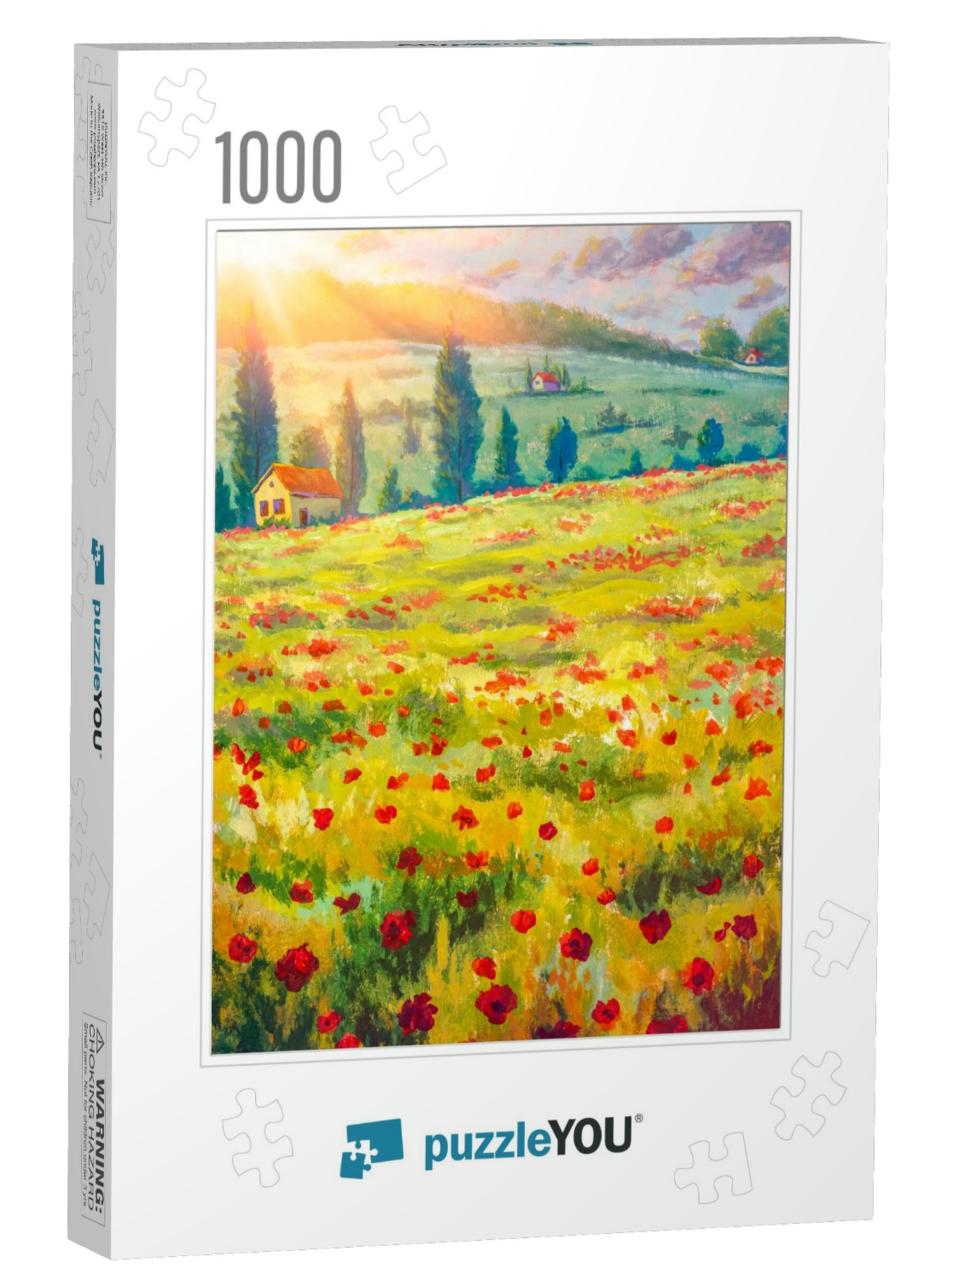 Red Poppies Tulips Rose Flowers in Green Grass Palette Kn... Jigsaw Puzzle with 1000 pieces